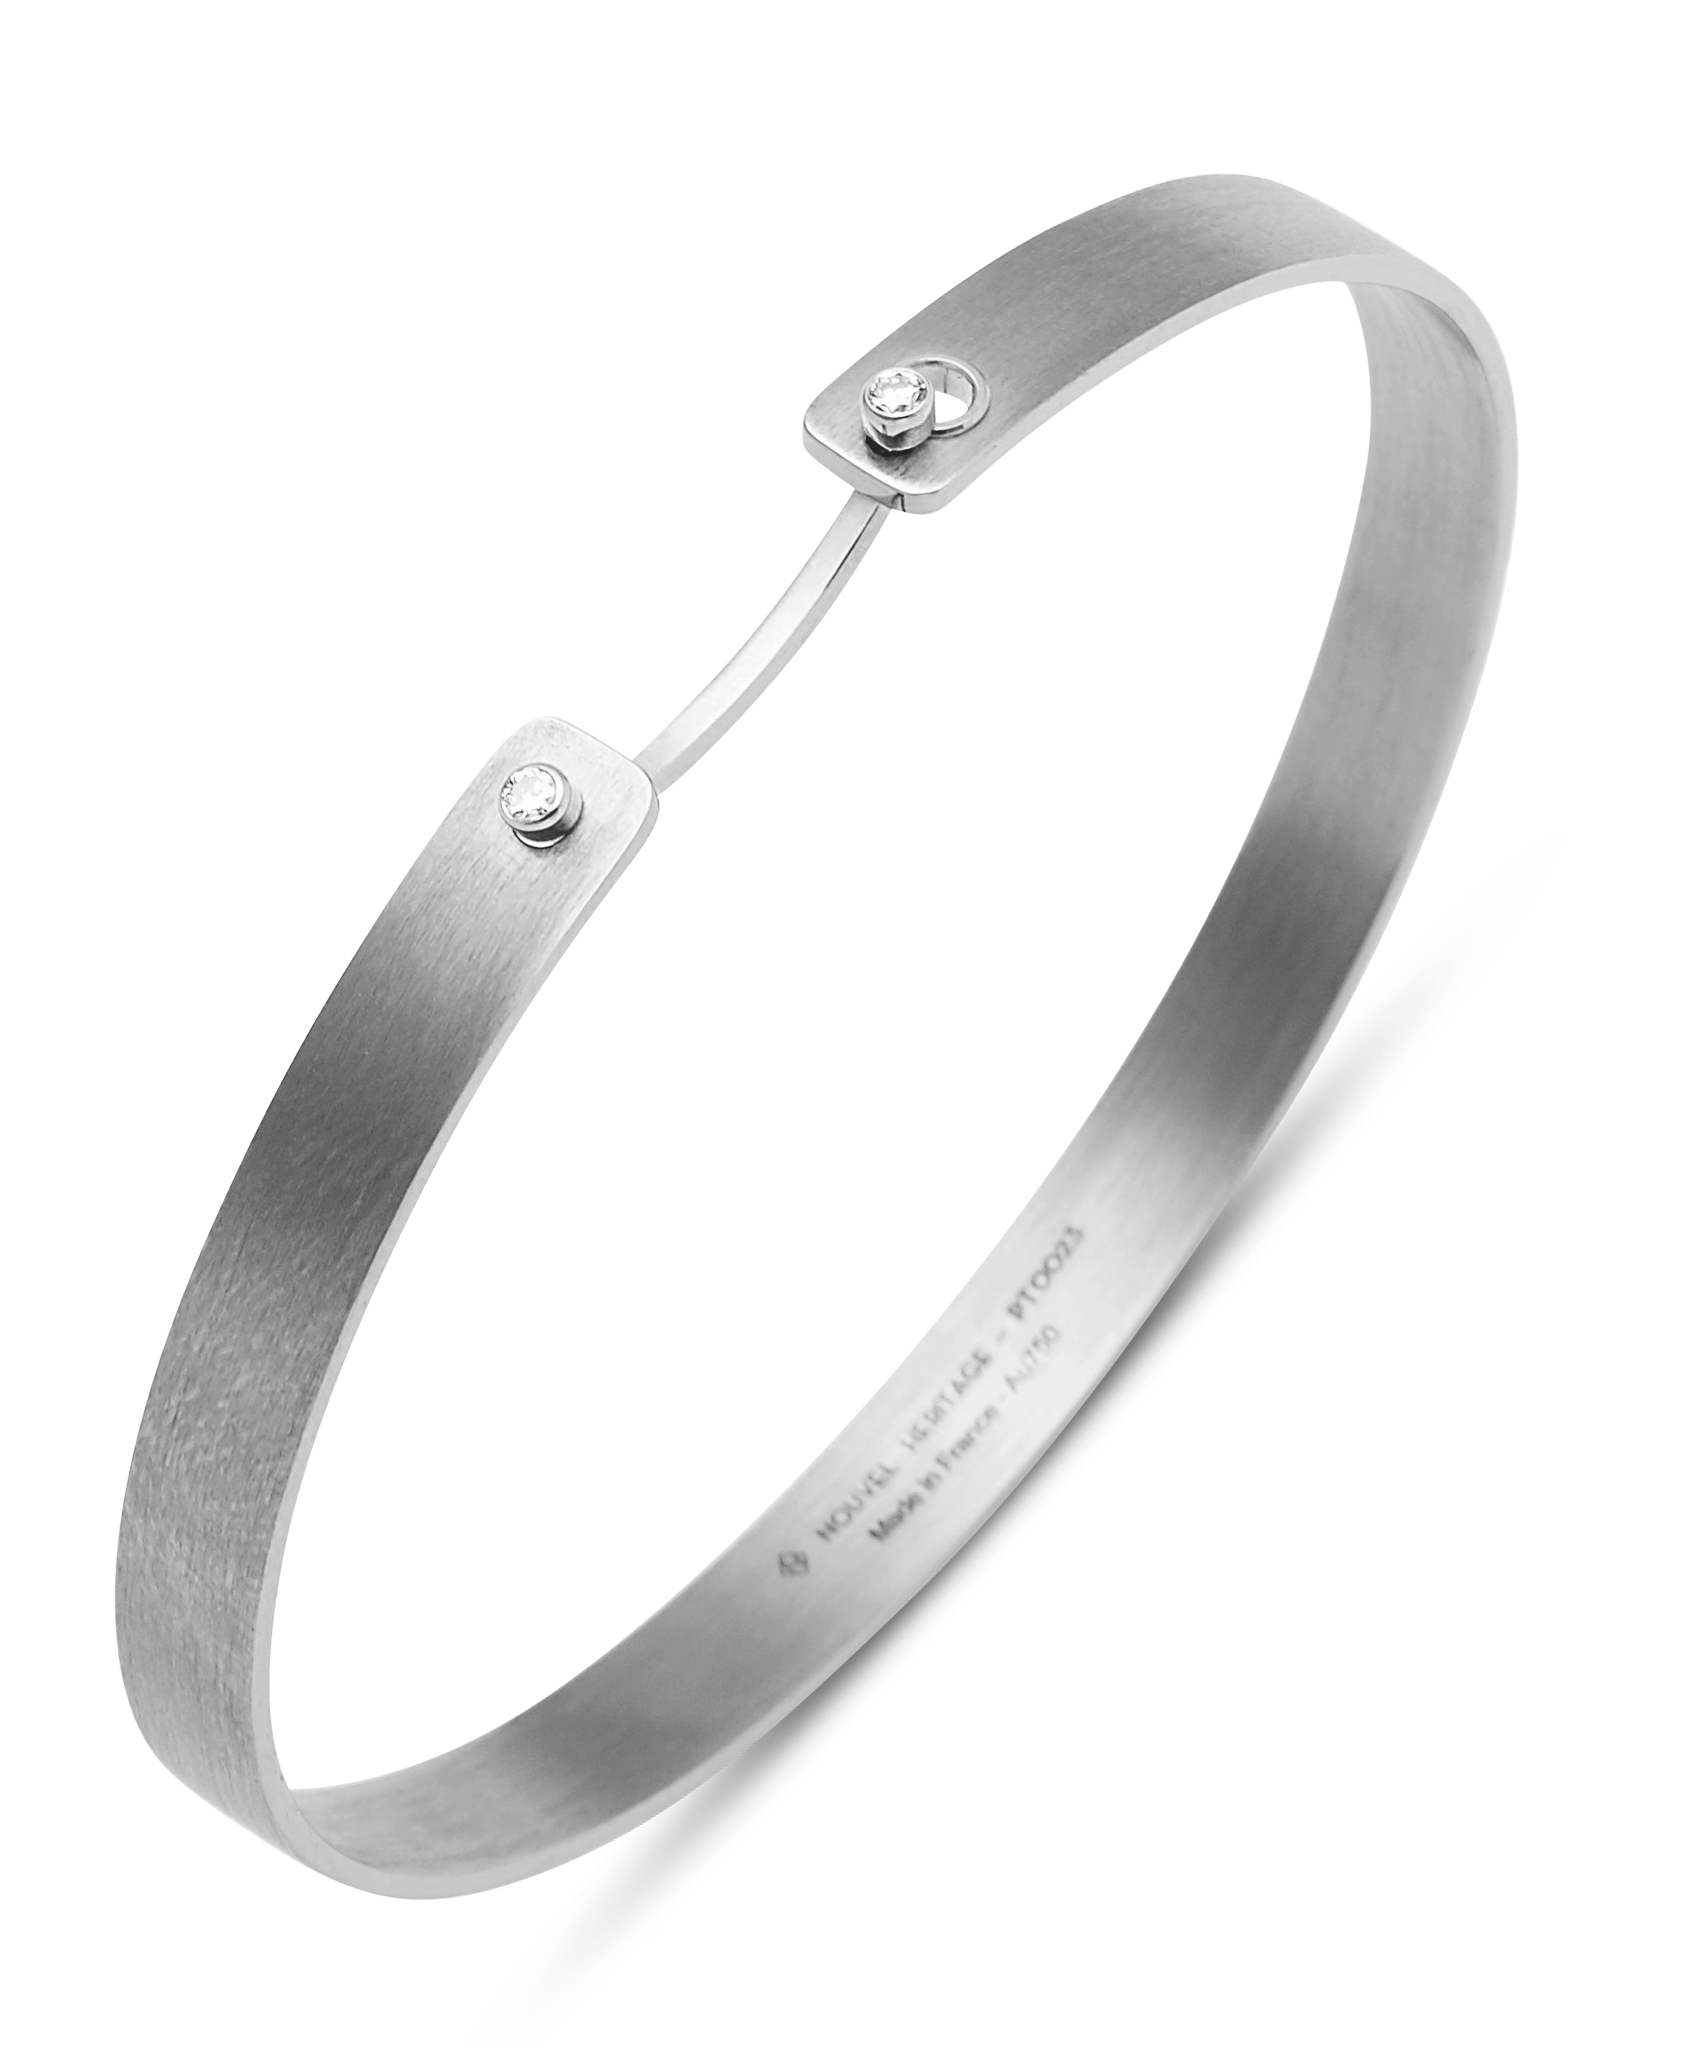 Titanium bangle for the groom available at Zadok's, a jeweler in Houston, TX.